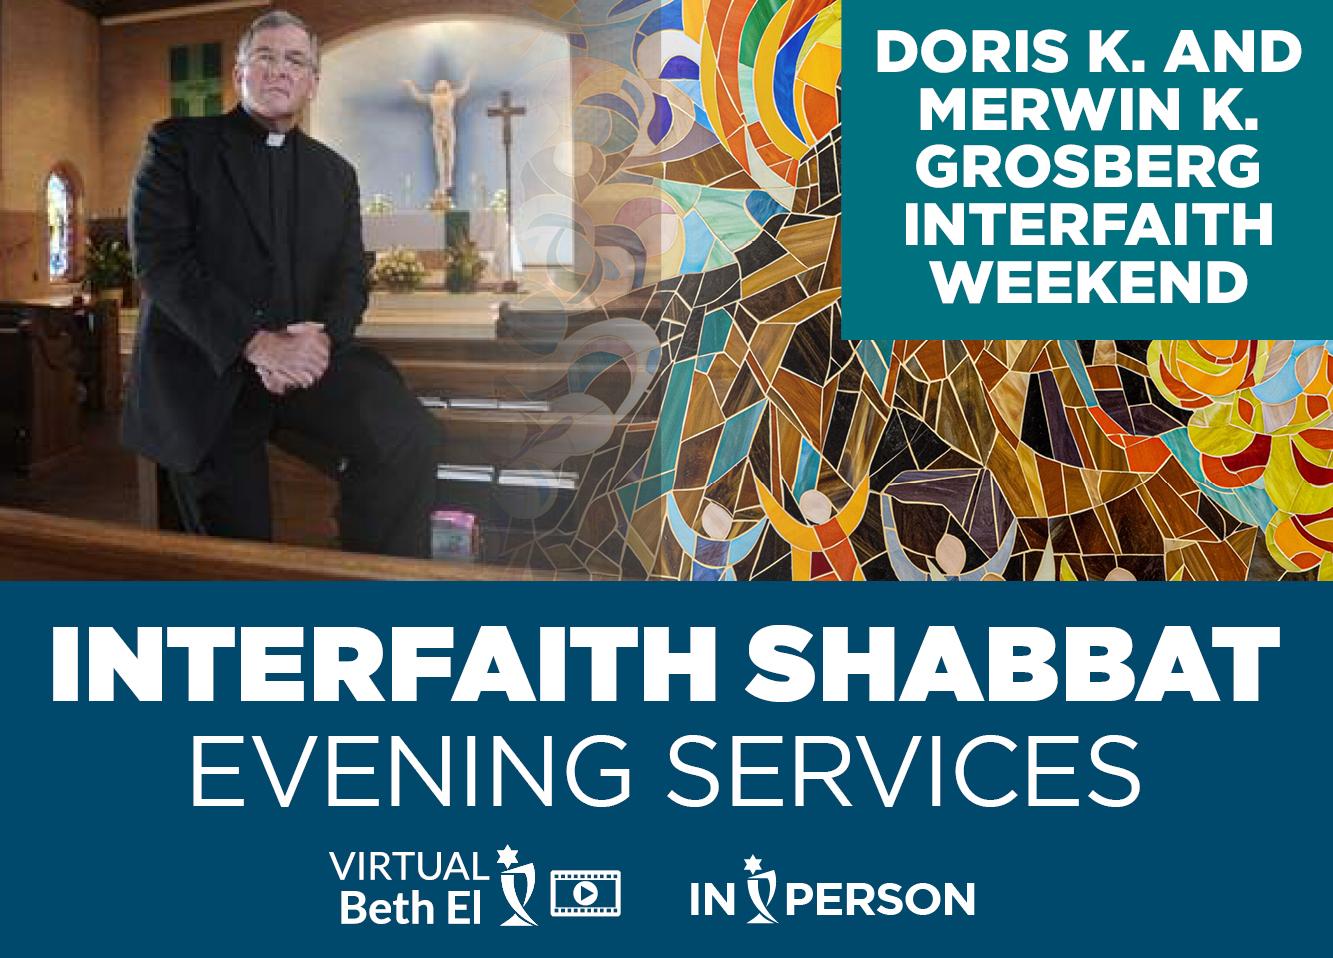 Interfaith Shabbat Services event graphic for Temple Beth El of Boca Raton in collaboration with St. Joan of Arc Catholic Church